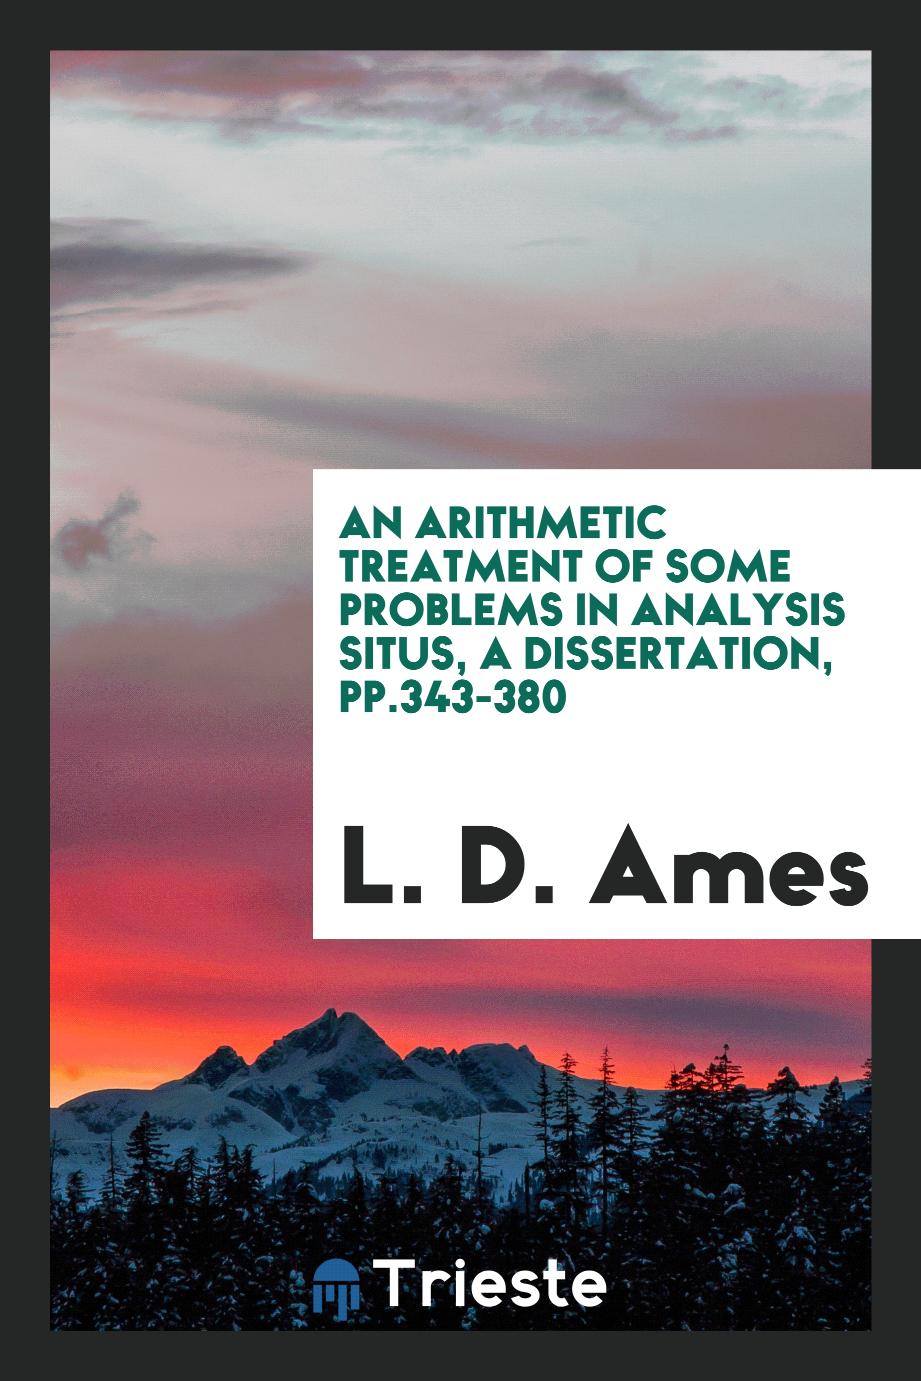 An Arithmetic Treatment of Some Problems in Analysis Situs, A Dissertation, pp.343-380